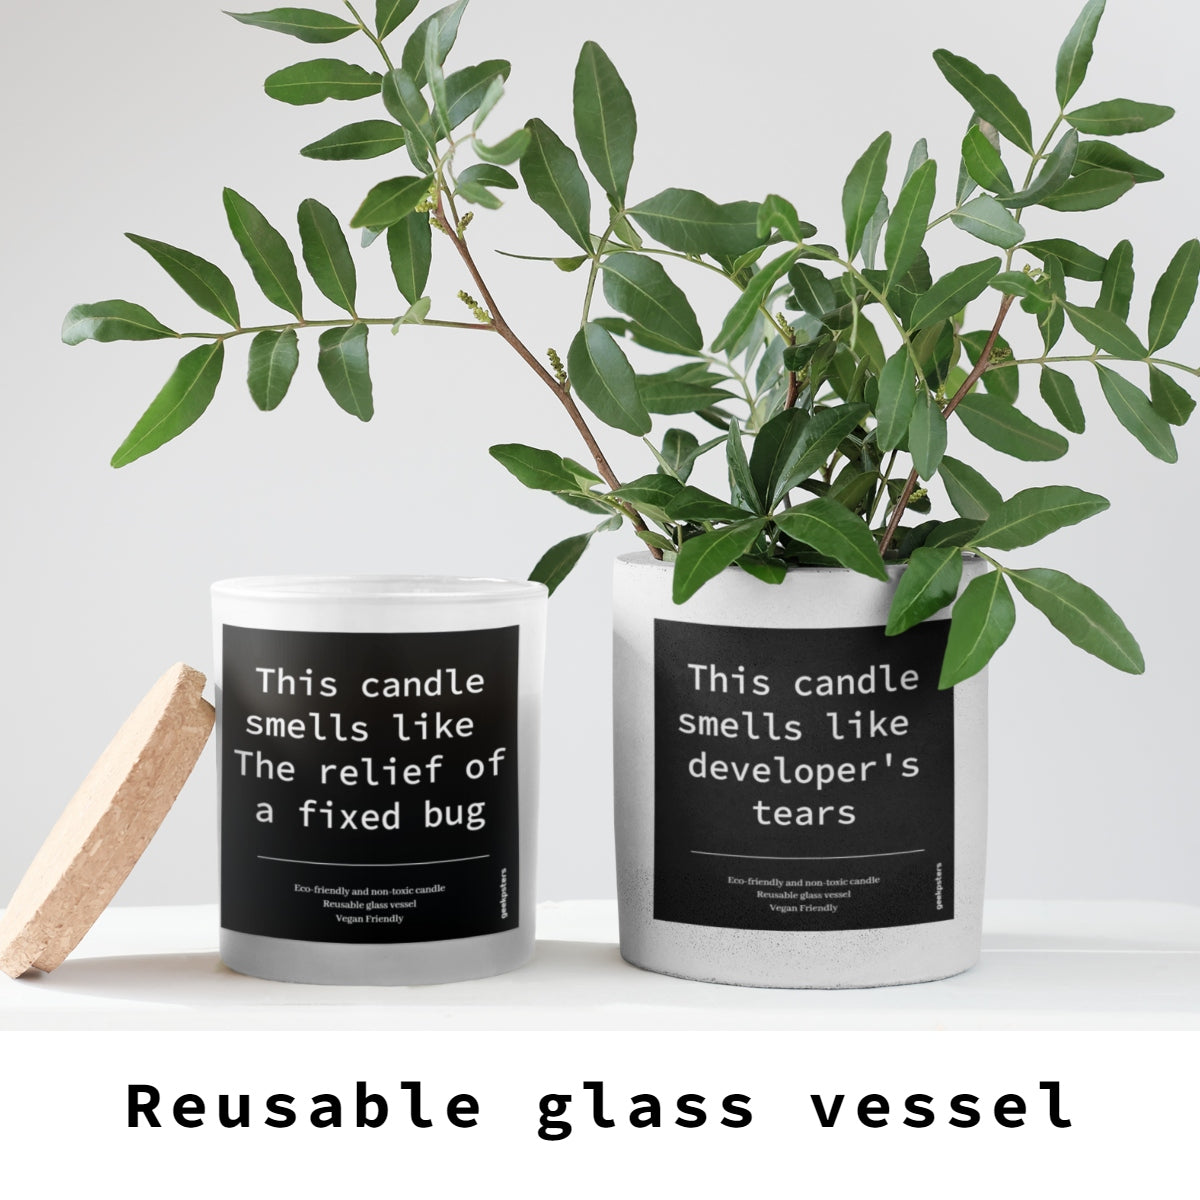 Two 9oz soy candles in reusable glass jars with humorous labels, one reading "smells like the relief of a fixed bug" and the other "smells like developer's tears," accompanied by This Candle Smells Like the Pressure of a Looming Deadline- Scented Soy Candle, 9oz.